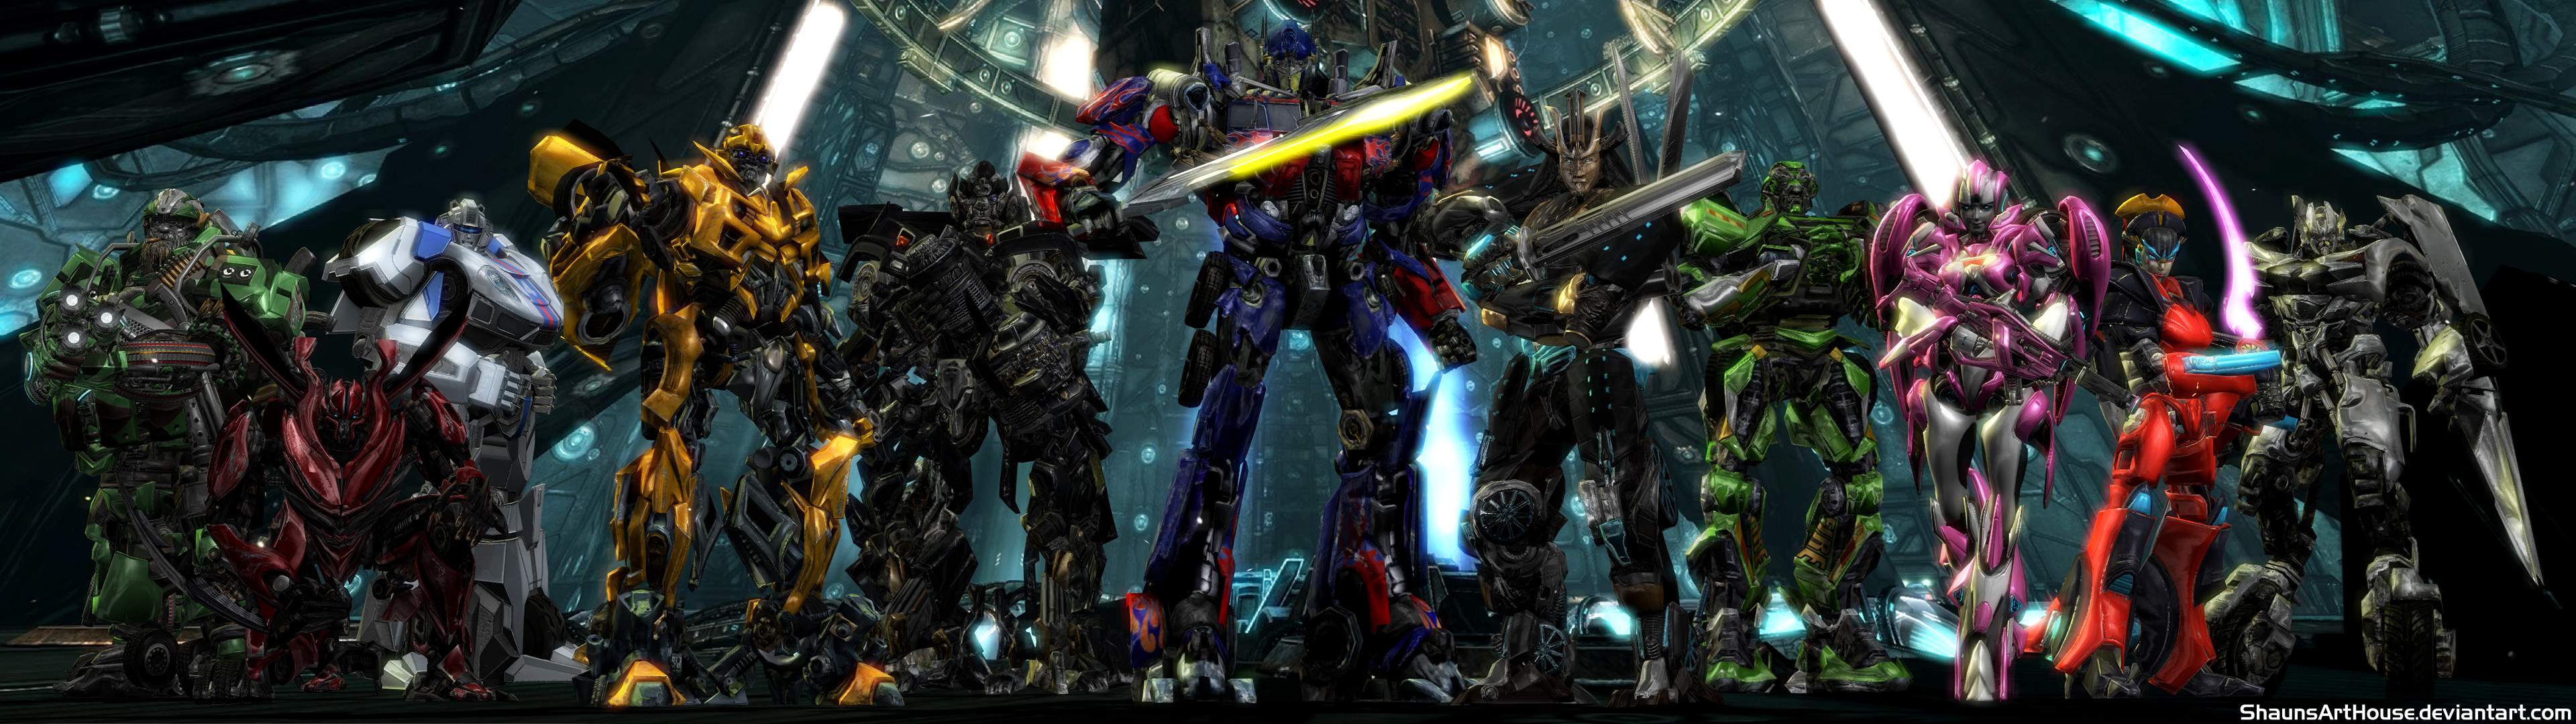 3840x1080 ... Transformers G1- Autobots Dual Screen Wallpaper by ShaunsArtHouse